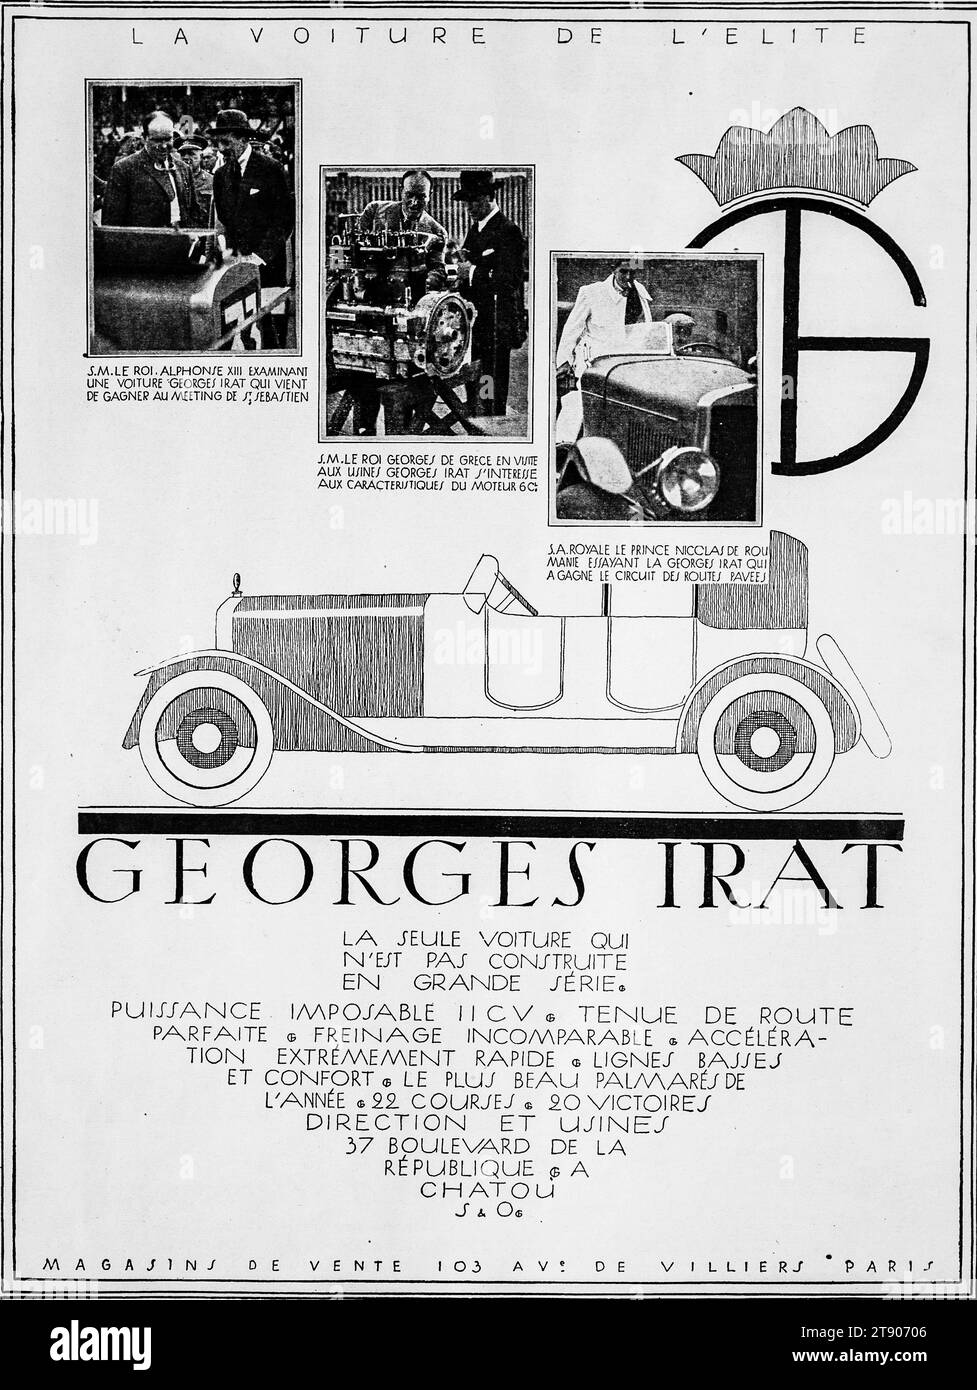 A 1920s advertisement for the elite Georges Irat automobile featuring black and white images and illustrations. Stock Photo